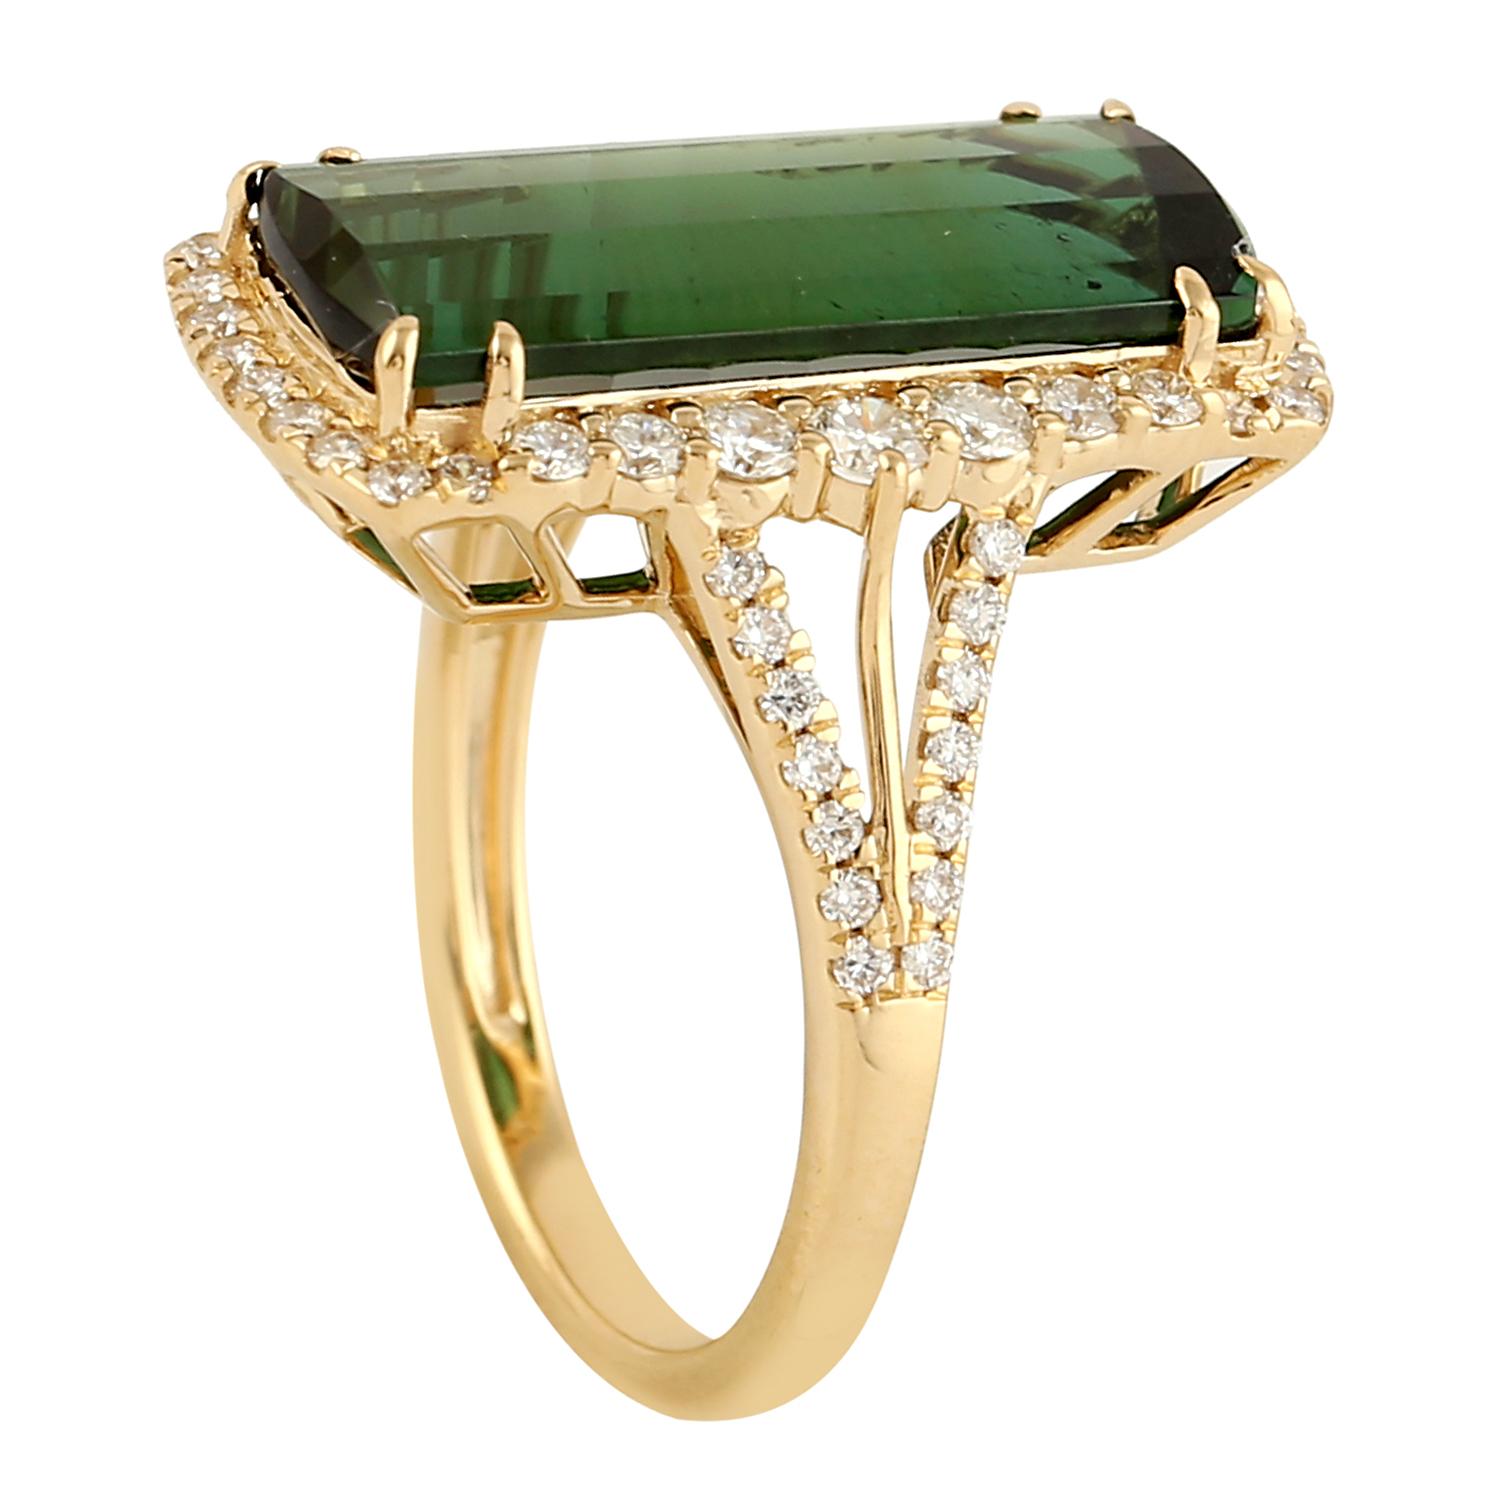 Green Tourmaline Cocktail Ring With Pave Diamonds Made In 18k yellow Gold In New Condition For Sale In New York, NY